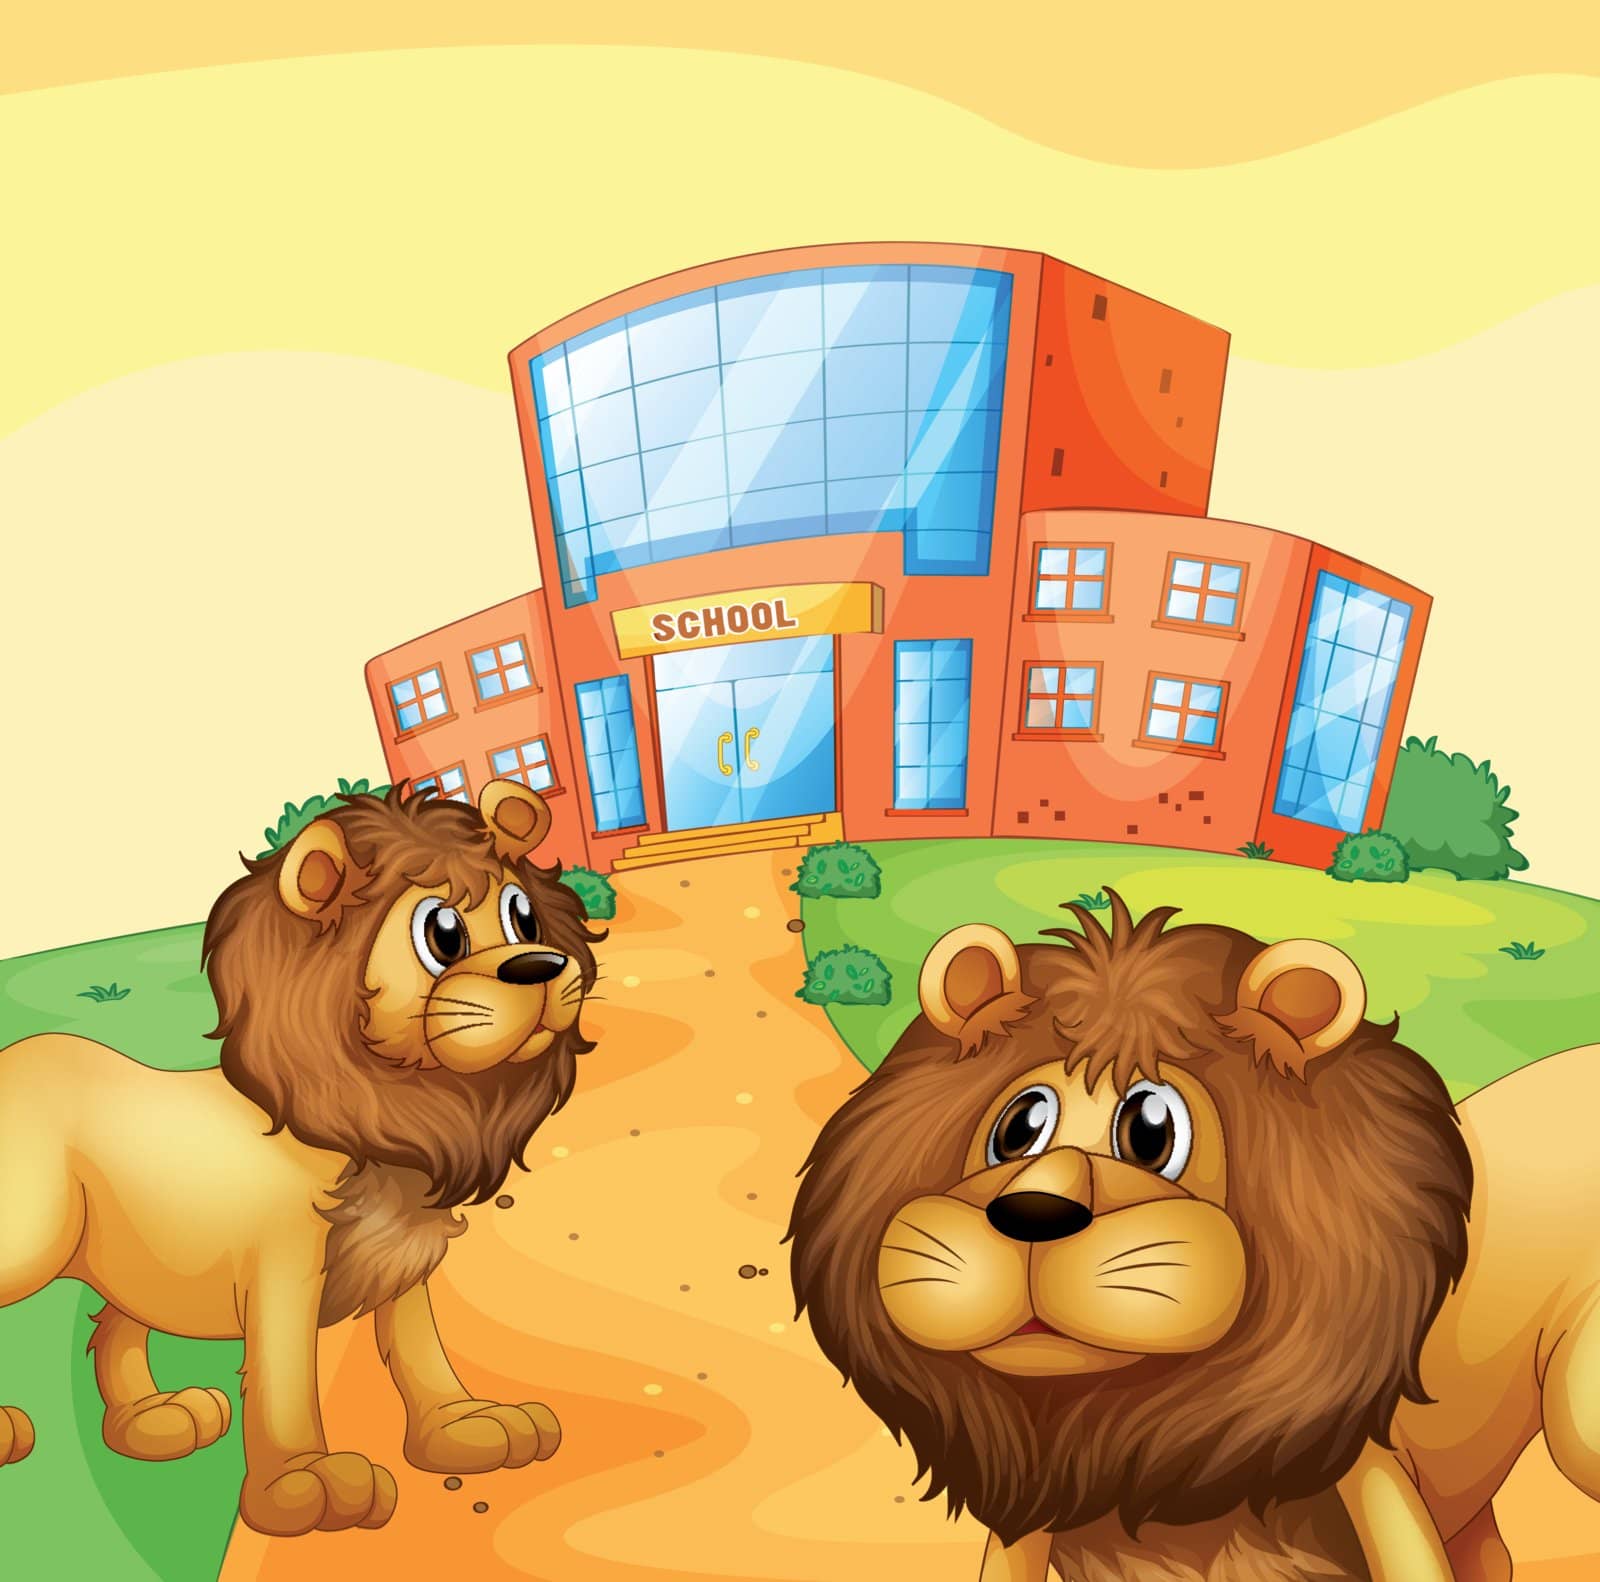 Illustration of the two wild lions in front of a school building